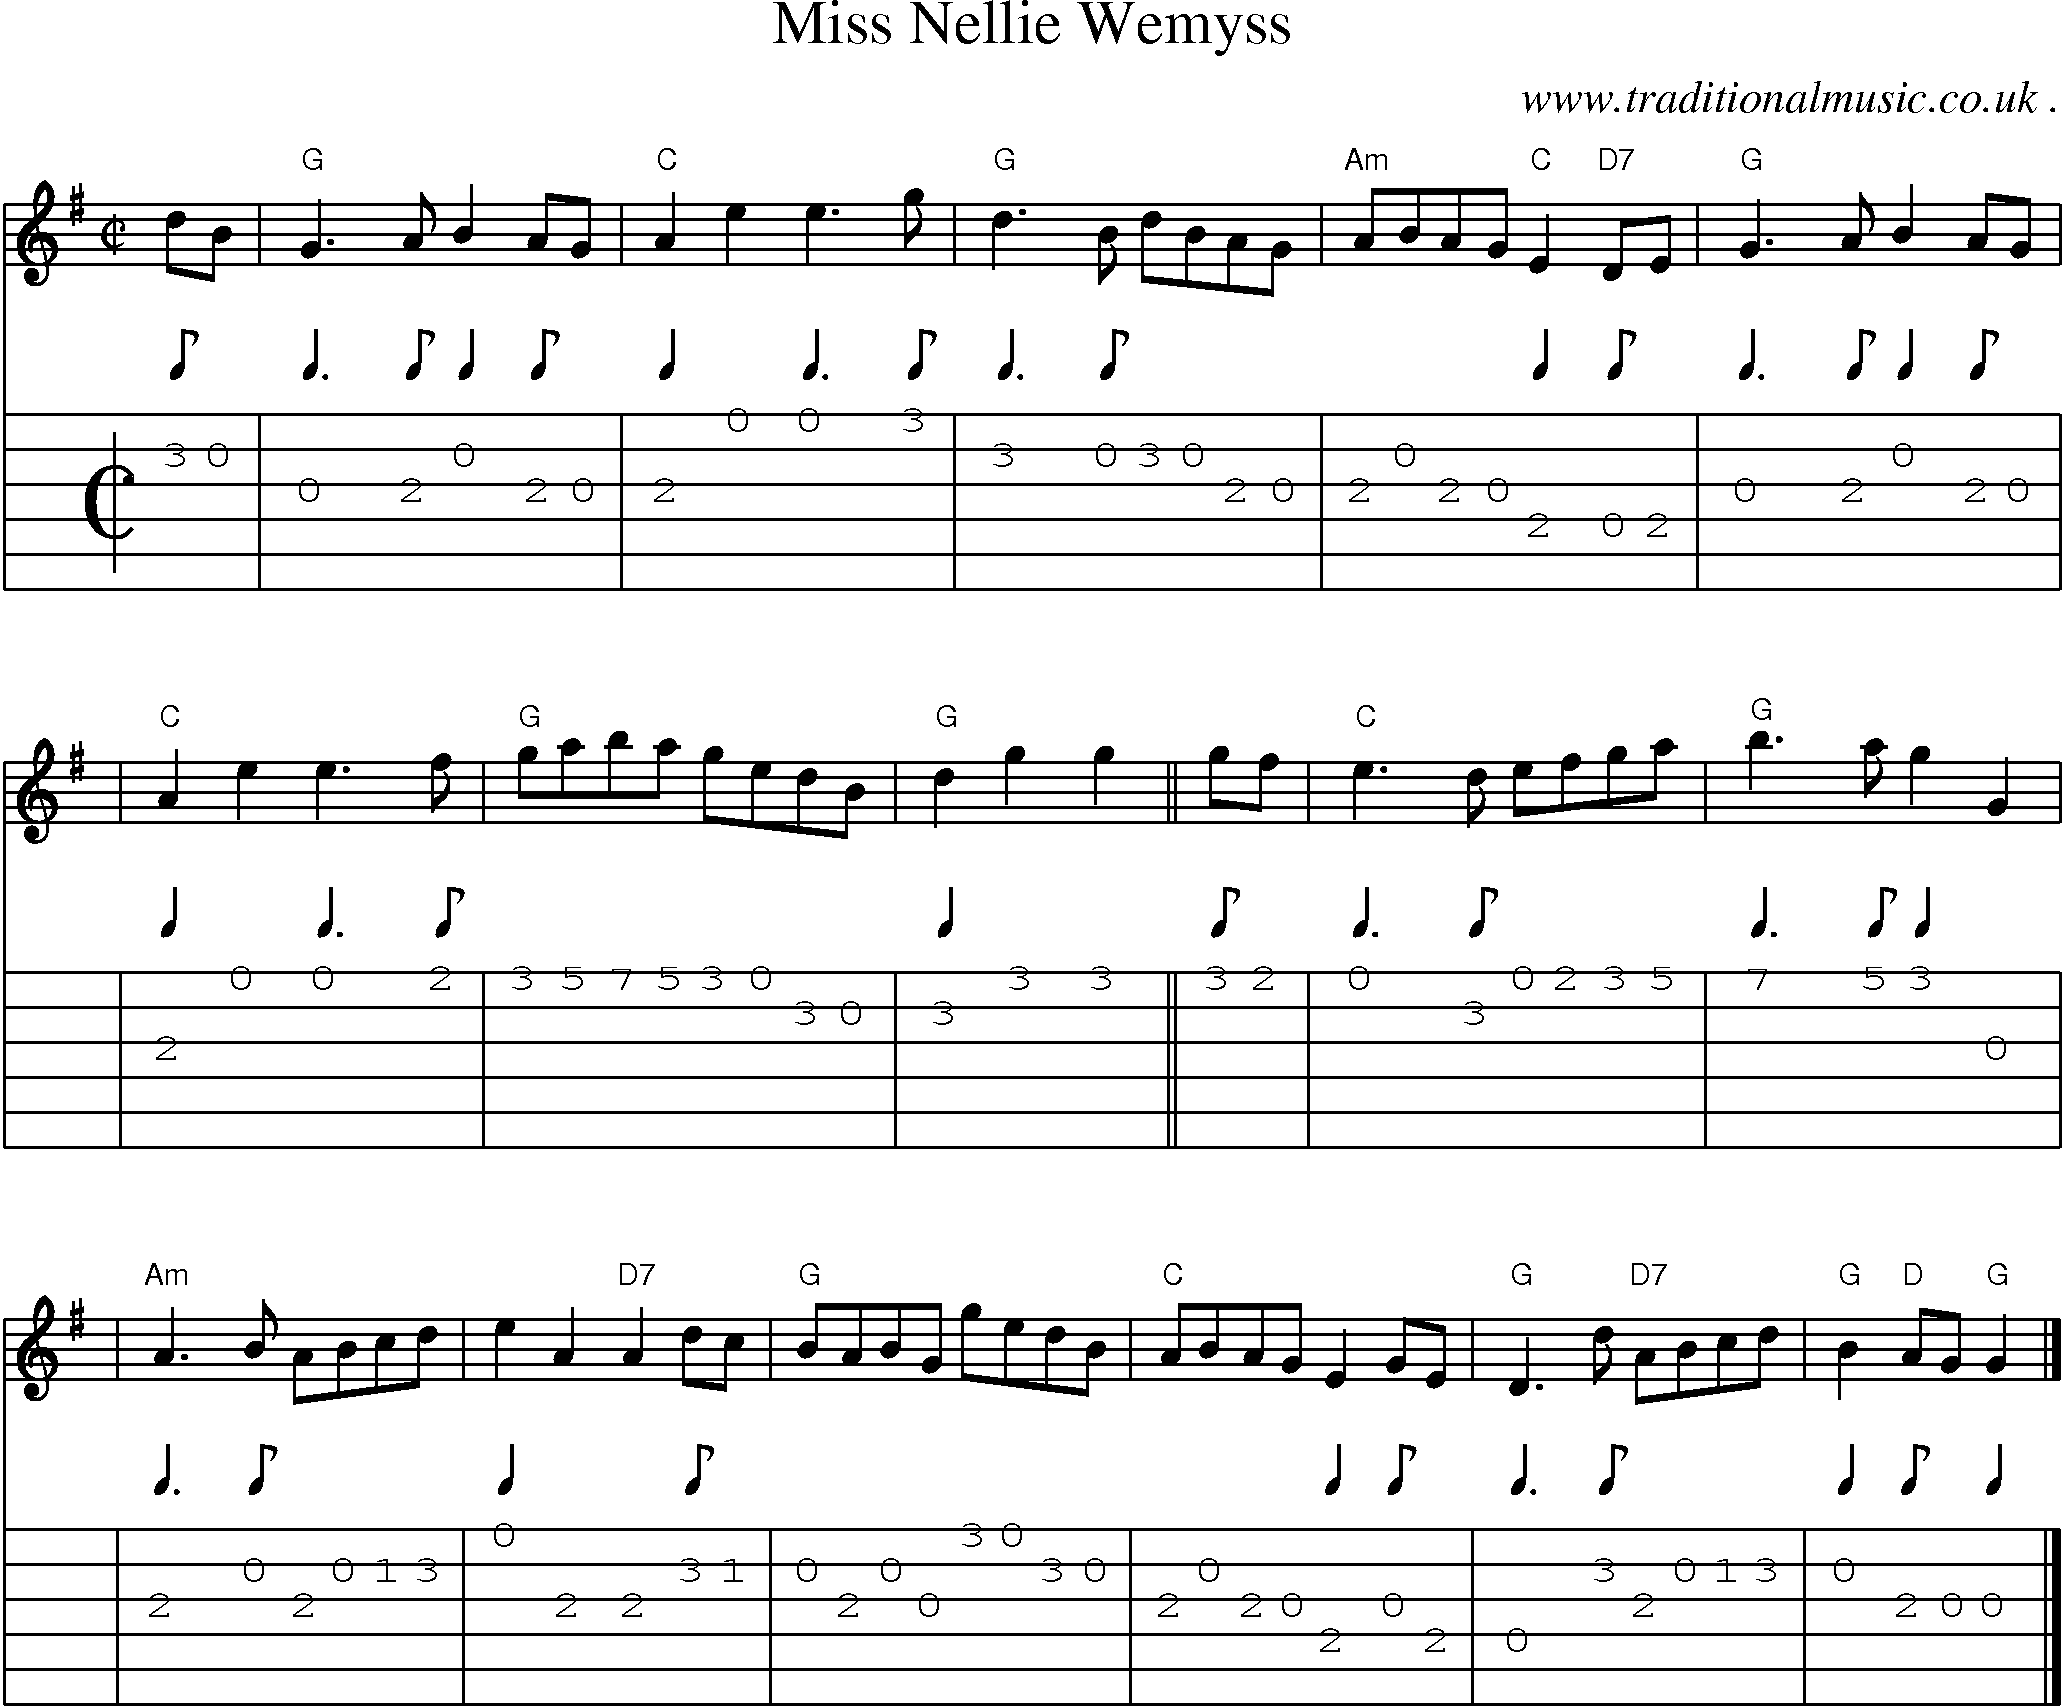 Sheet-music  score, Chords and Guitar Tabs for Miss Nellie Wemyss